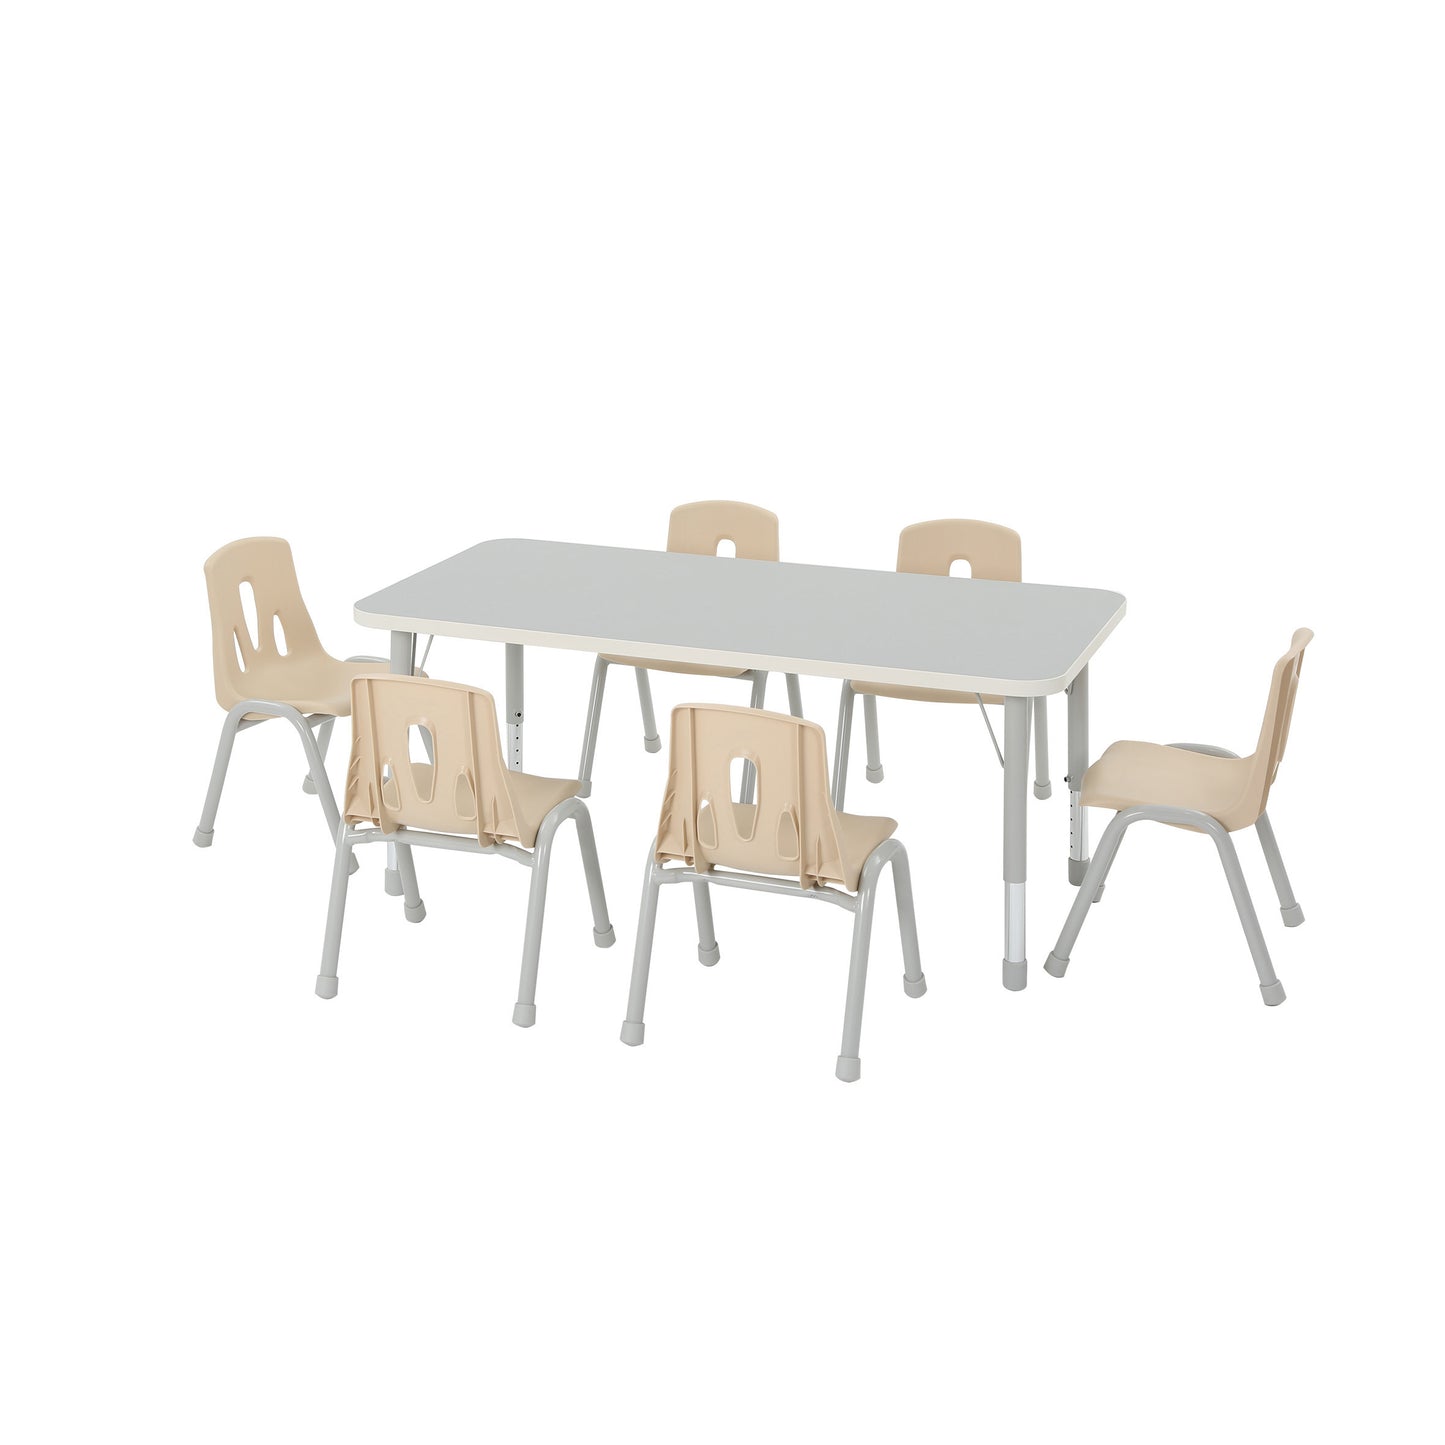 Thrifty Rectangular Table 6 Seater – Grey